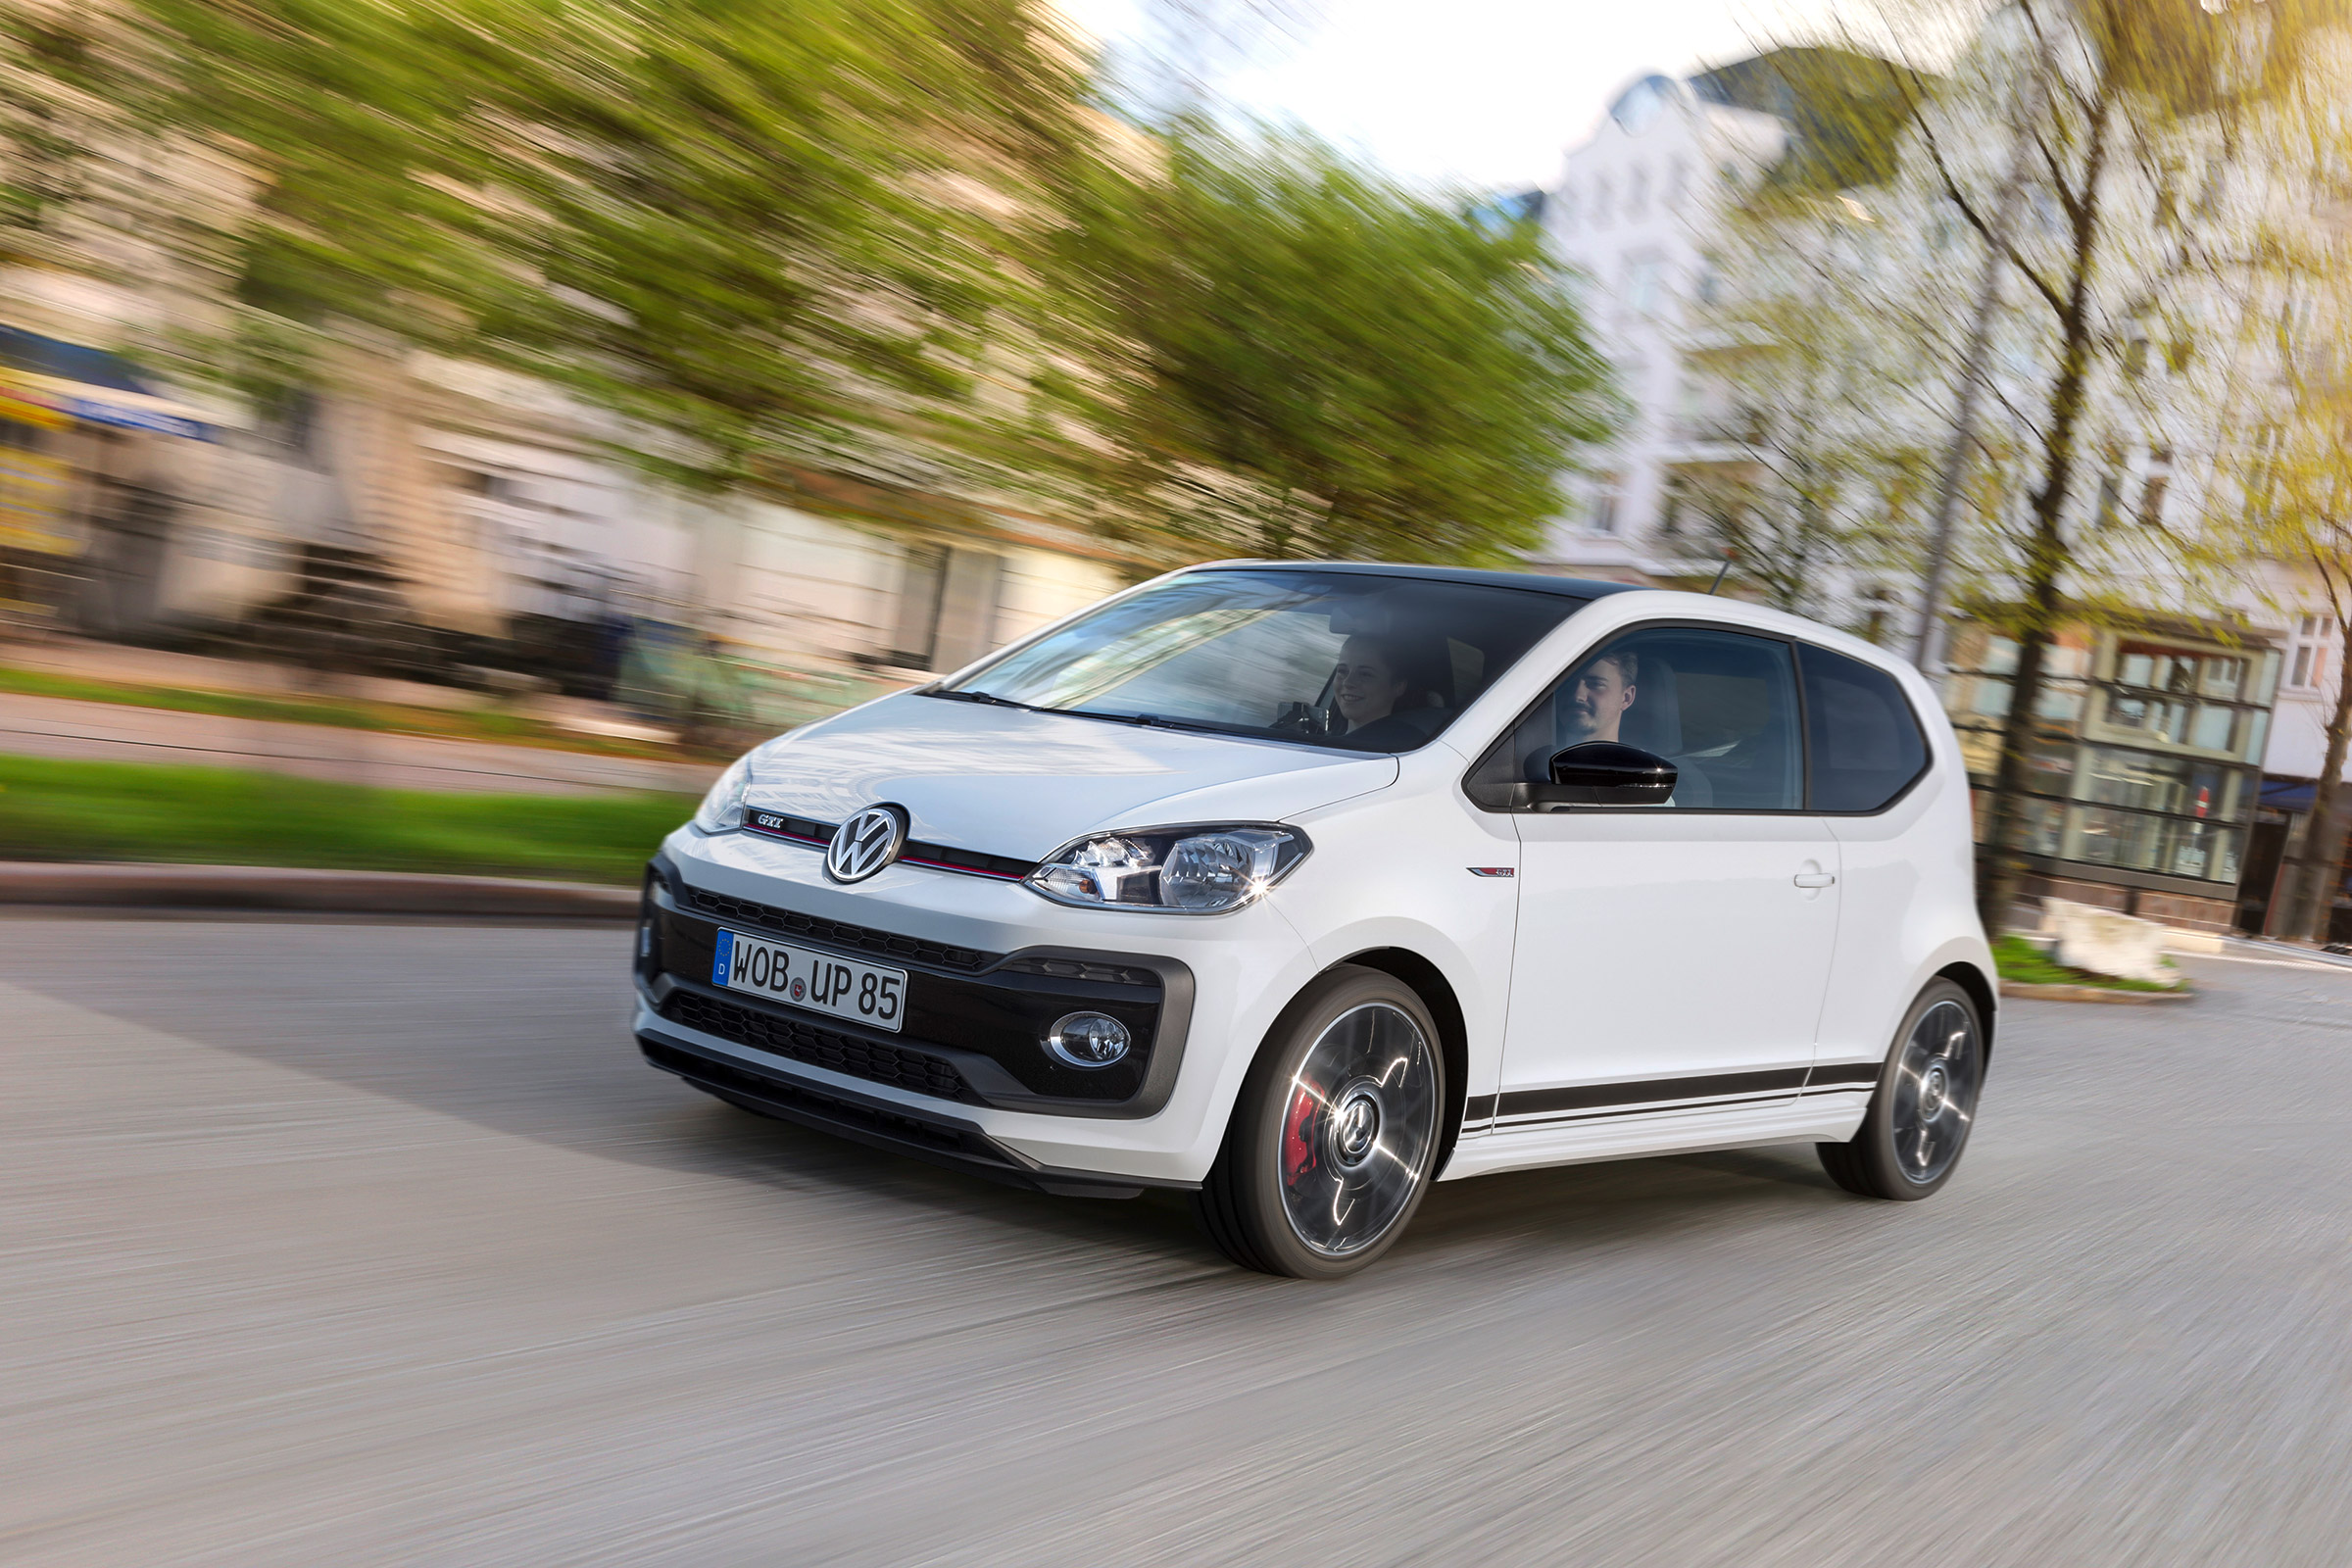 Volkswagen Up TSI review - prices, specs and 0-60 time